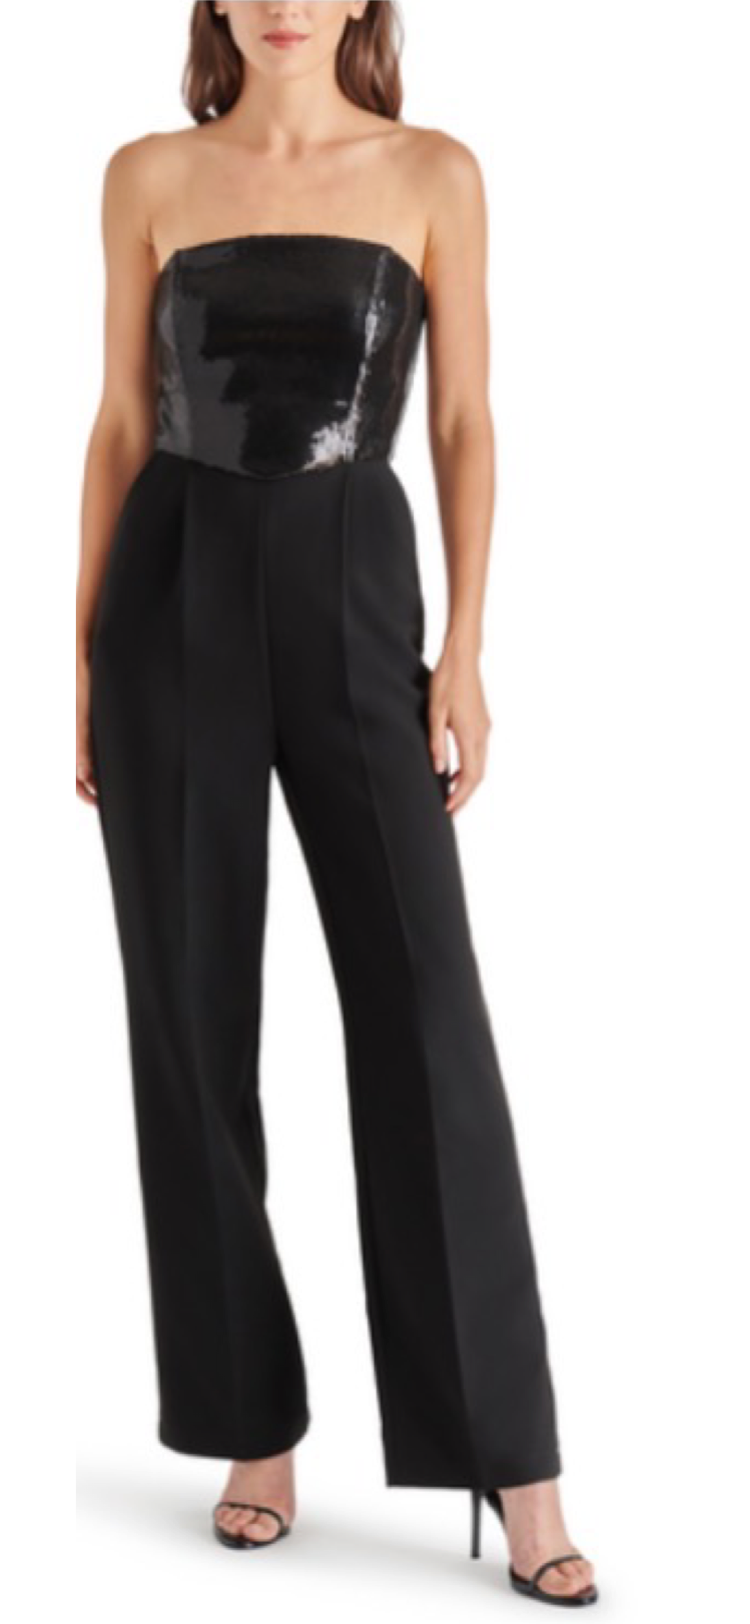 Bustier style jumpsuit by Steve Madden is